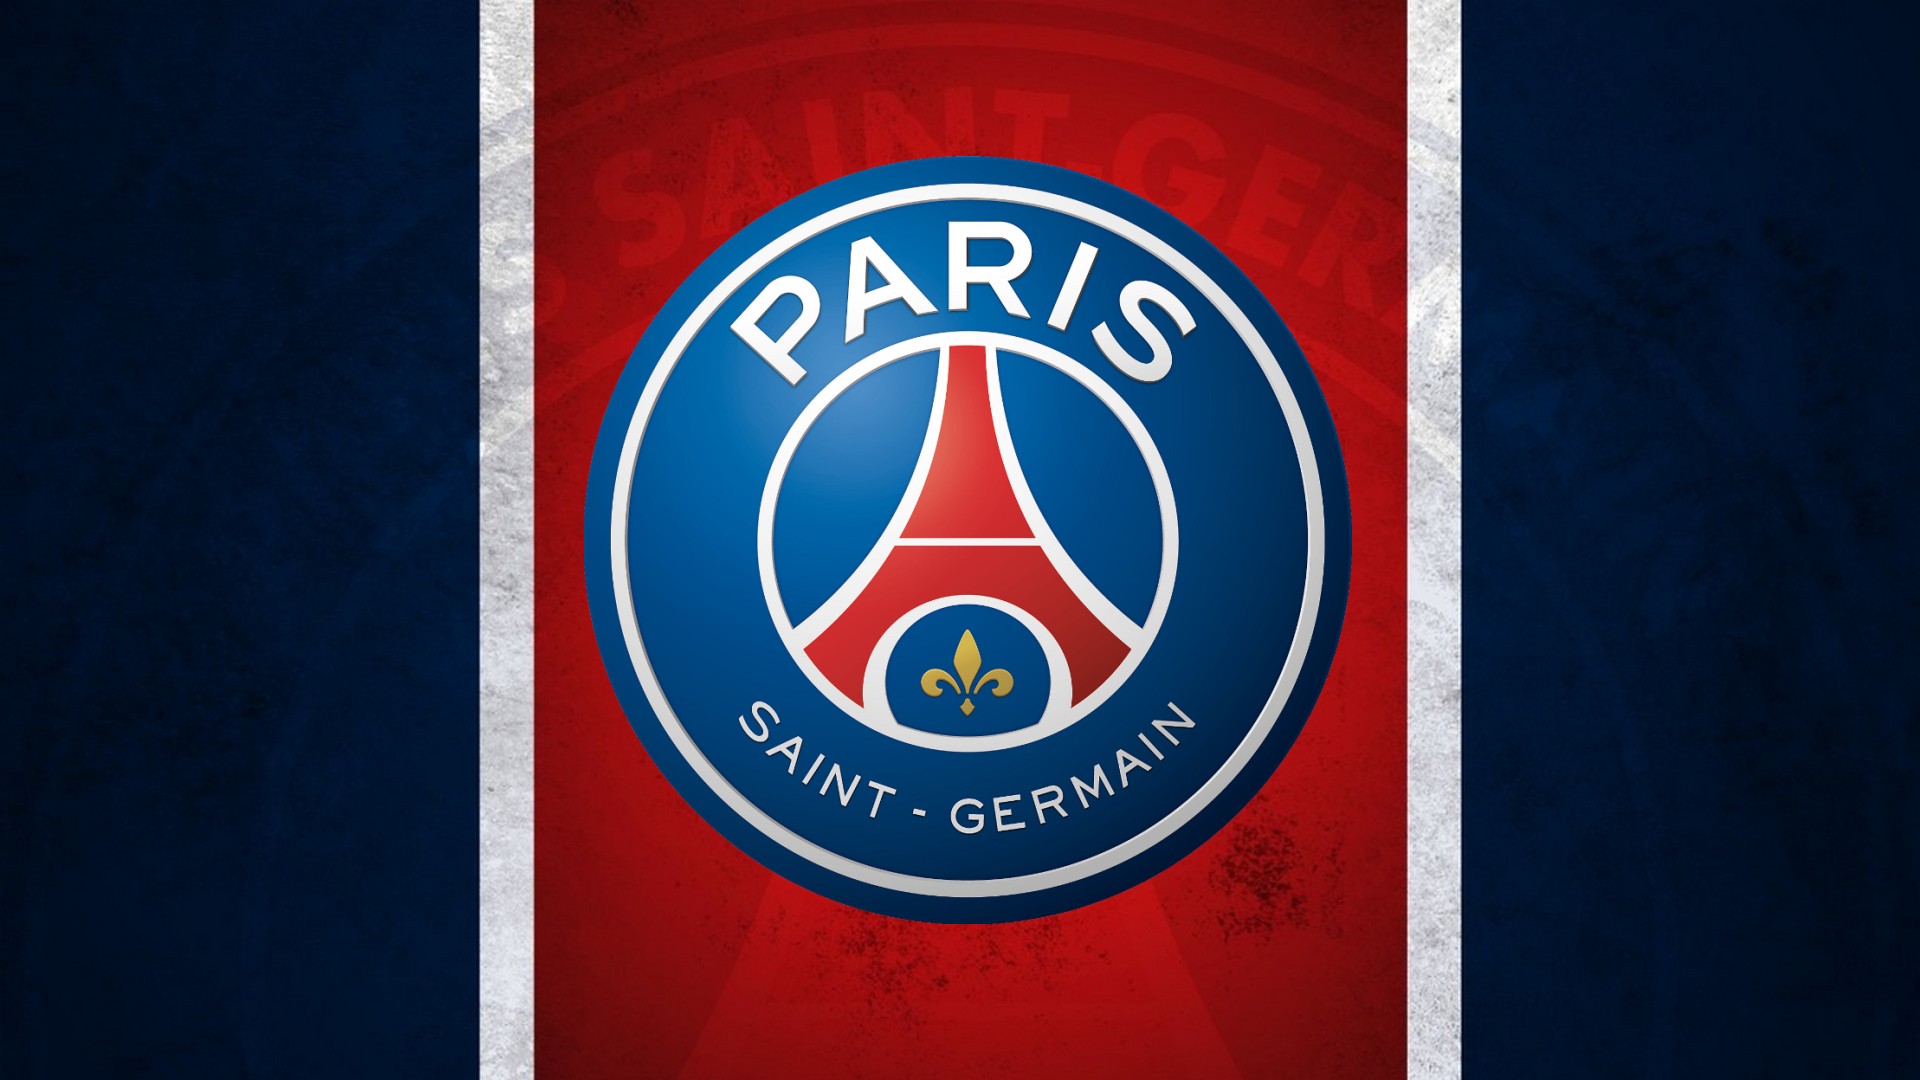 Paris Saint-Germain Desktop Wallpaper with resolution 1920x1080 pixel. You can make this wallpaper for your Mac or Windows Desktop Background, iPhone, Android or Tablet and another Smartphone device